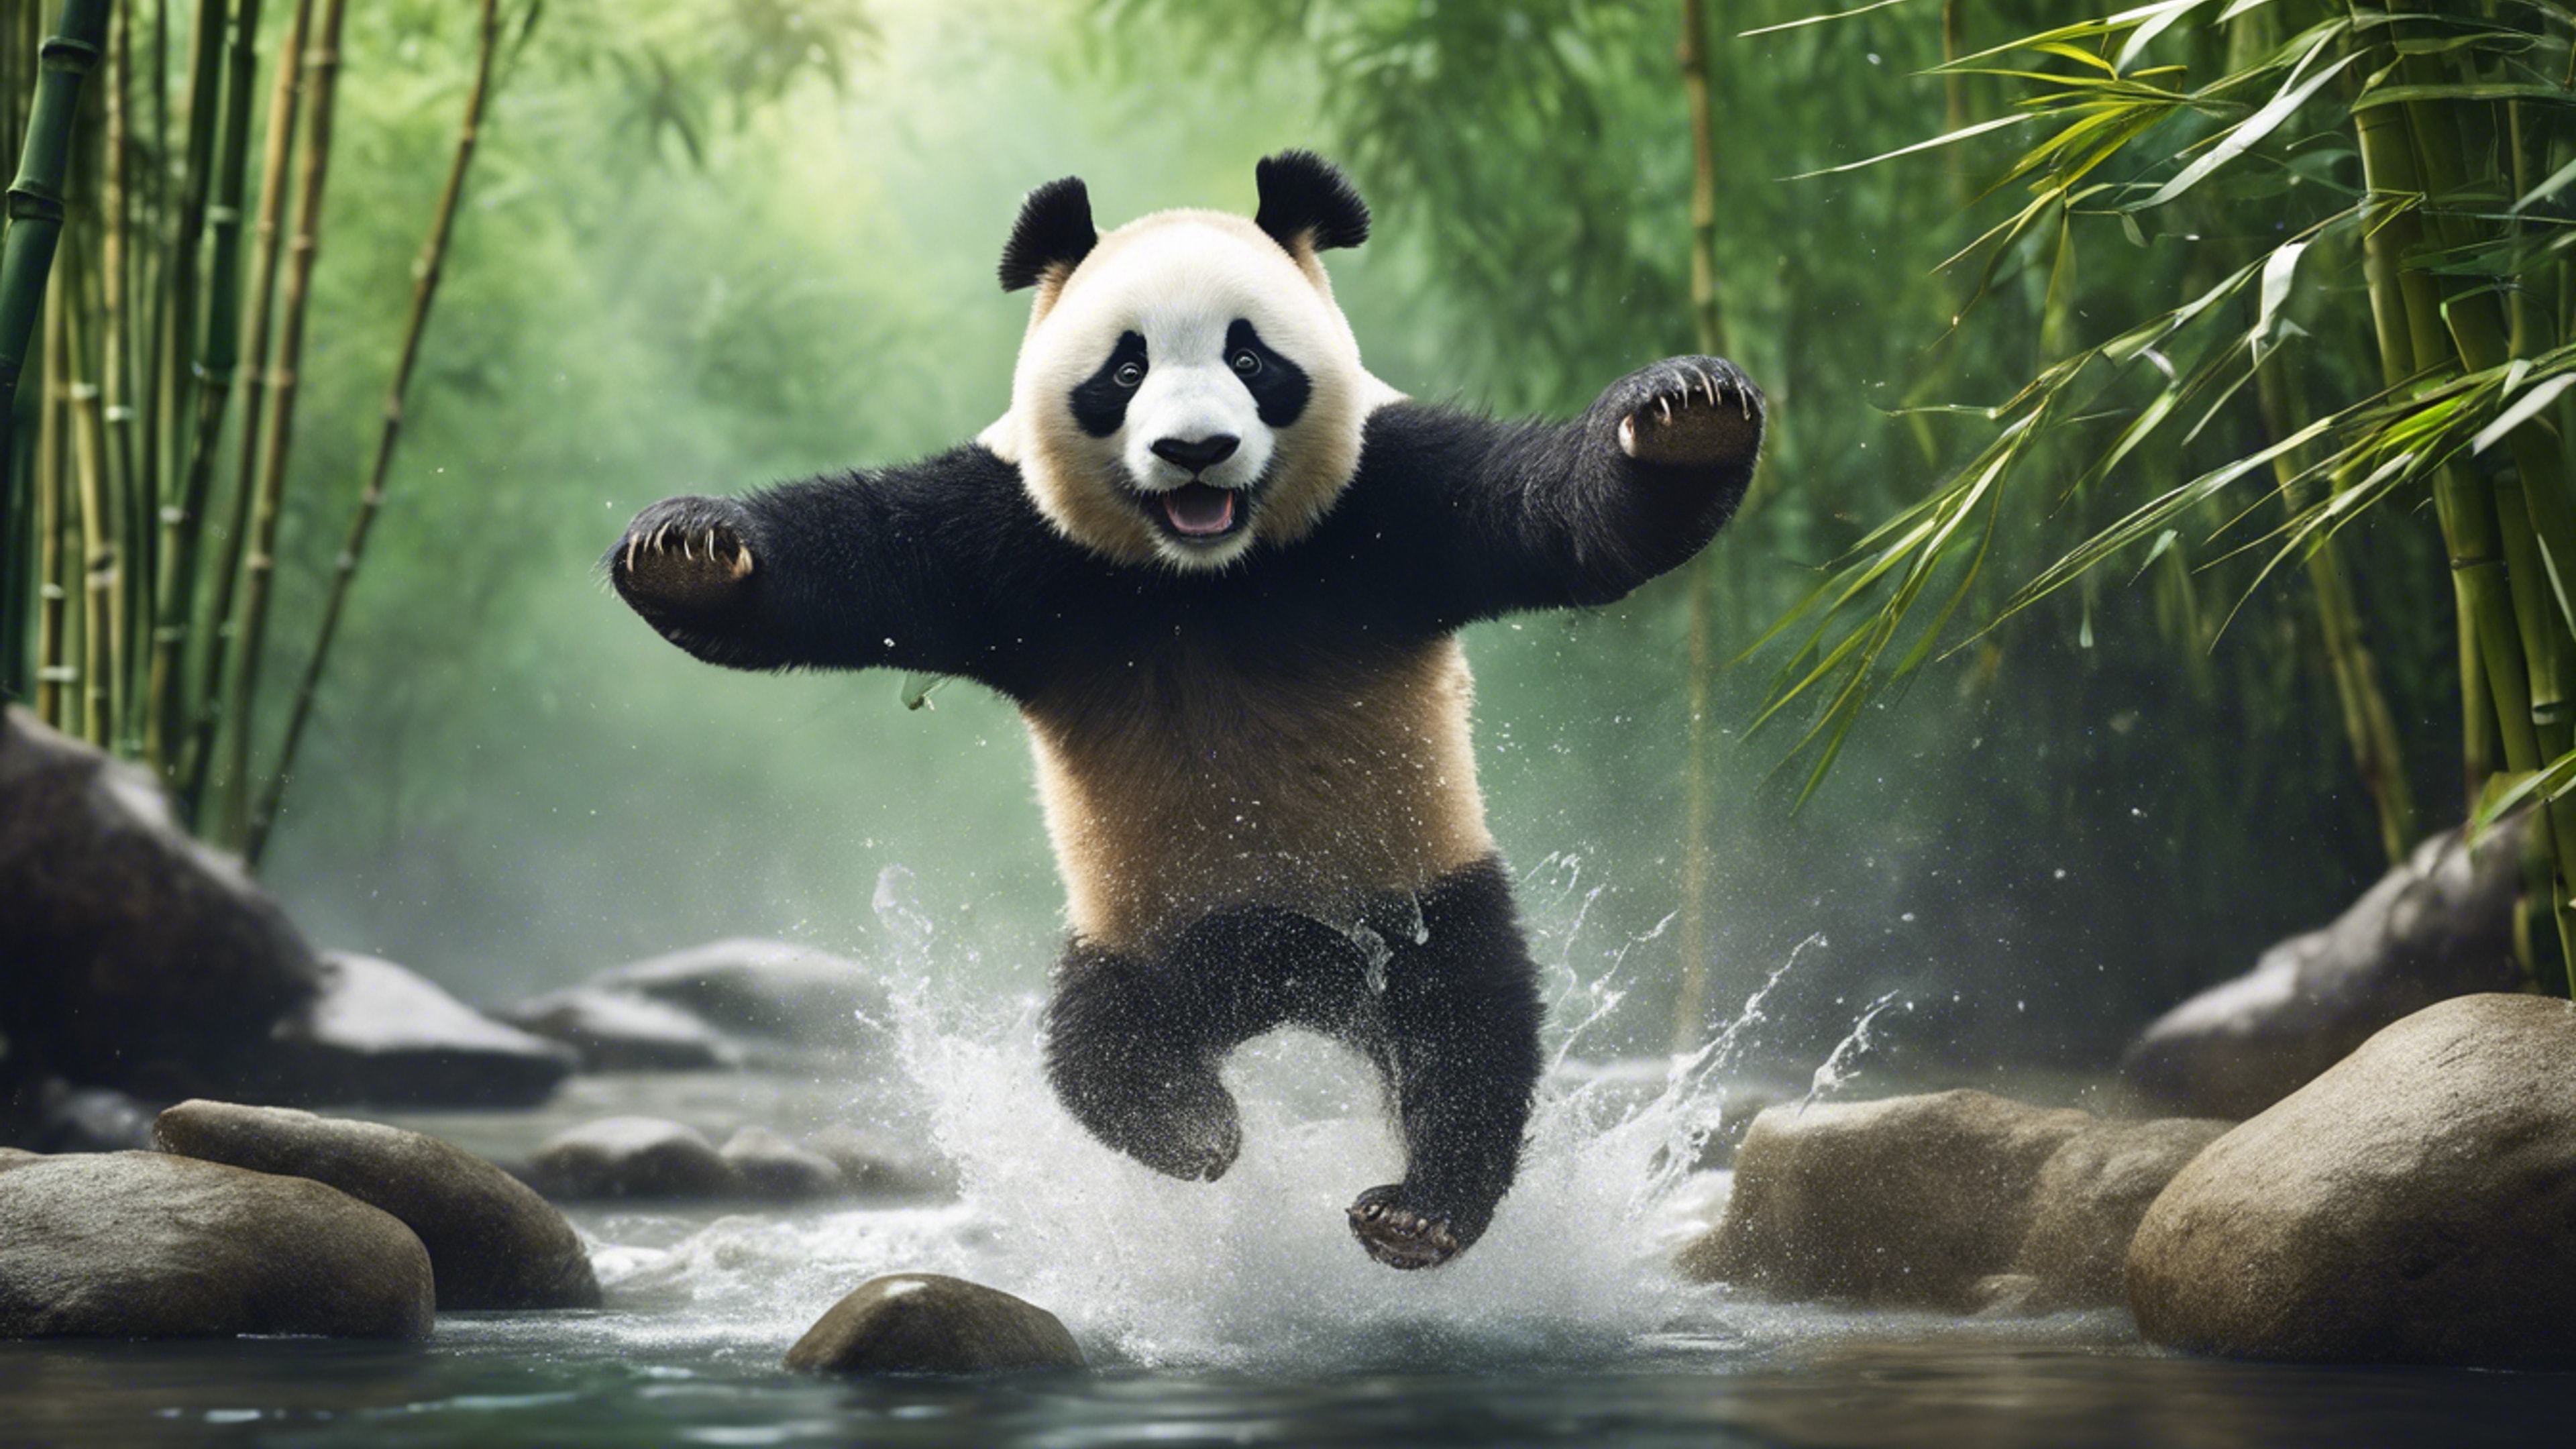 An adventurous panda leaping across a rapid creek with bamboo forests in the backdrop. Wallpaper[317eaaa1af264f04a7c3]